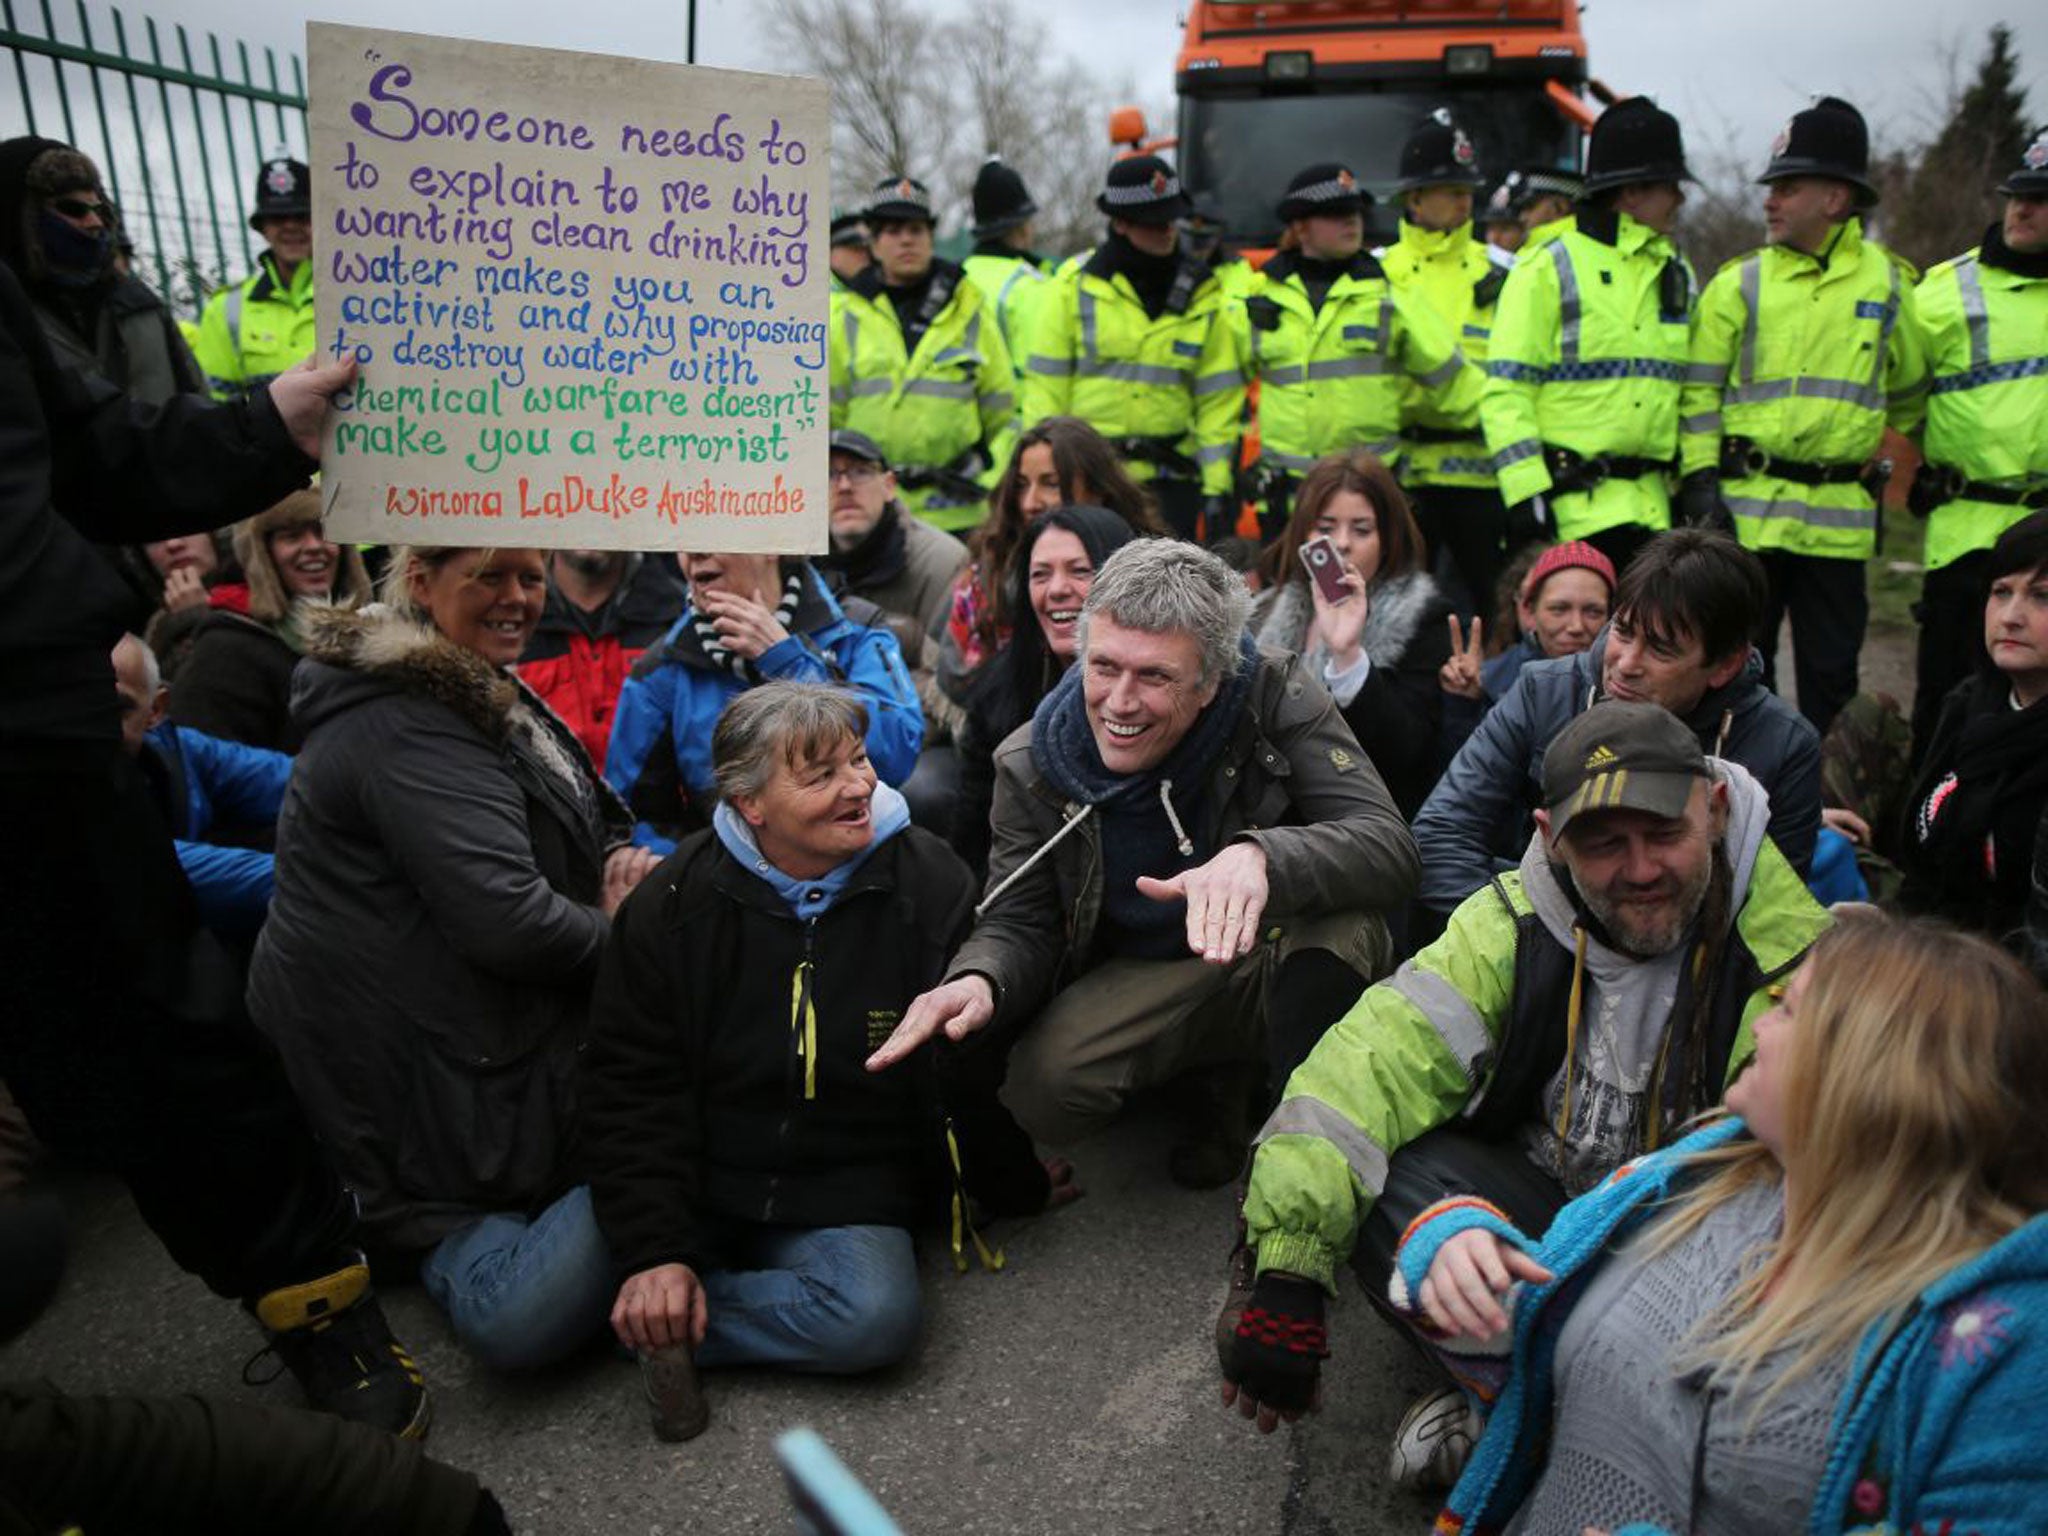 Happy Mondays star Bez joins protesters blocking lorries trying to enter the Igas fracking exploration site at Barton Moss in Salford yesterday. Bez, real name Mark Berry, intends to stand for Parliament next year for the Salford seat.